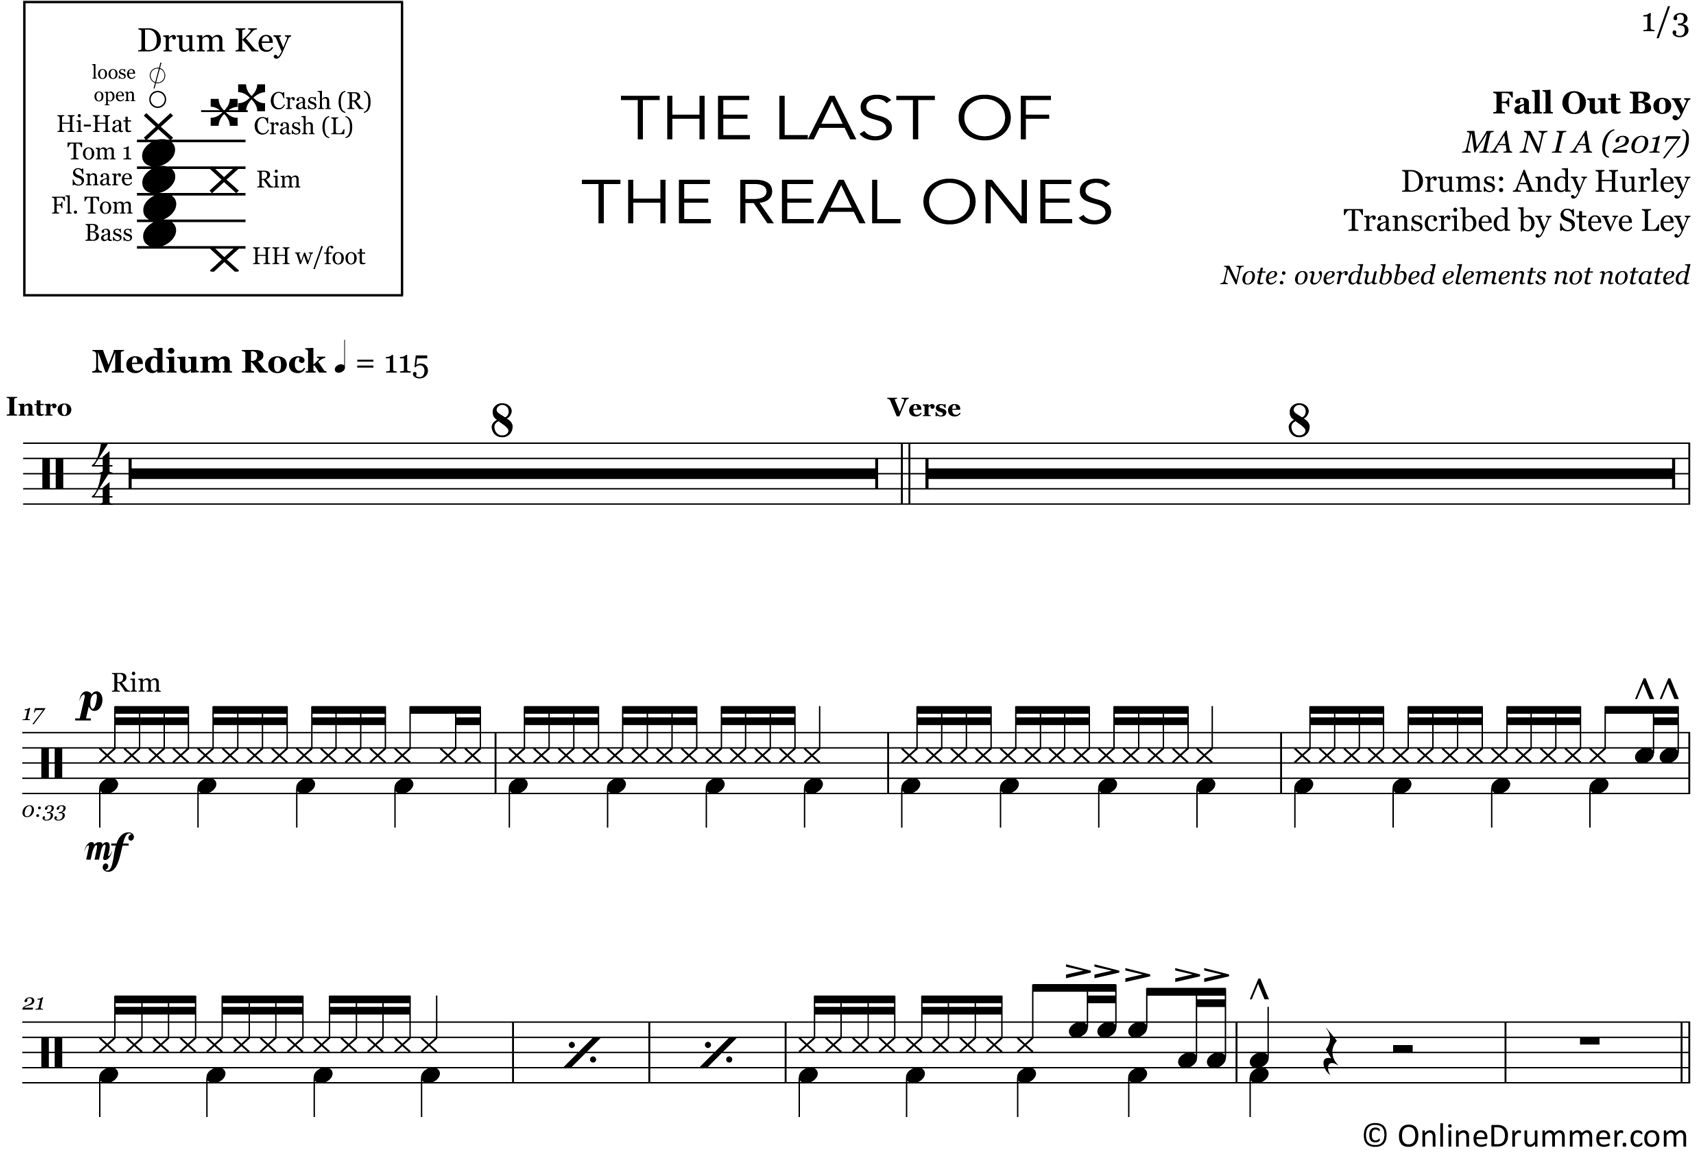 The Last of the Real Ones - Fall Out Boy - Drum Sheet Music